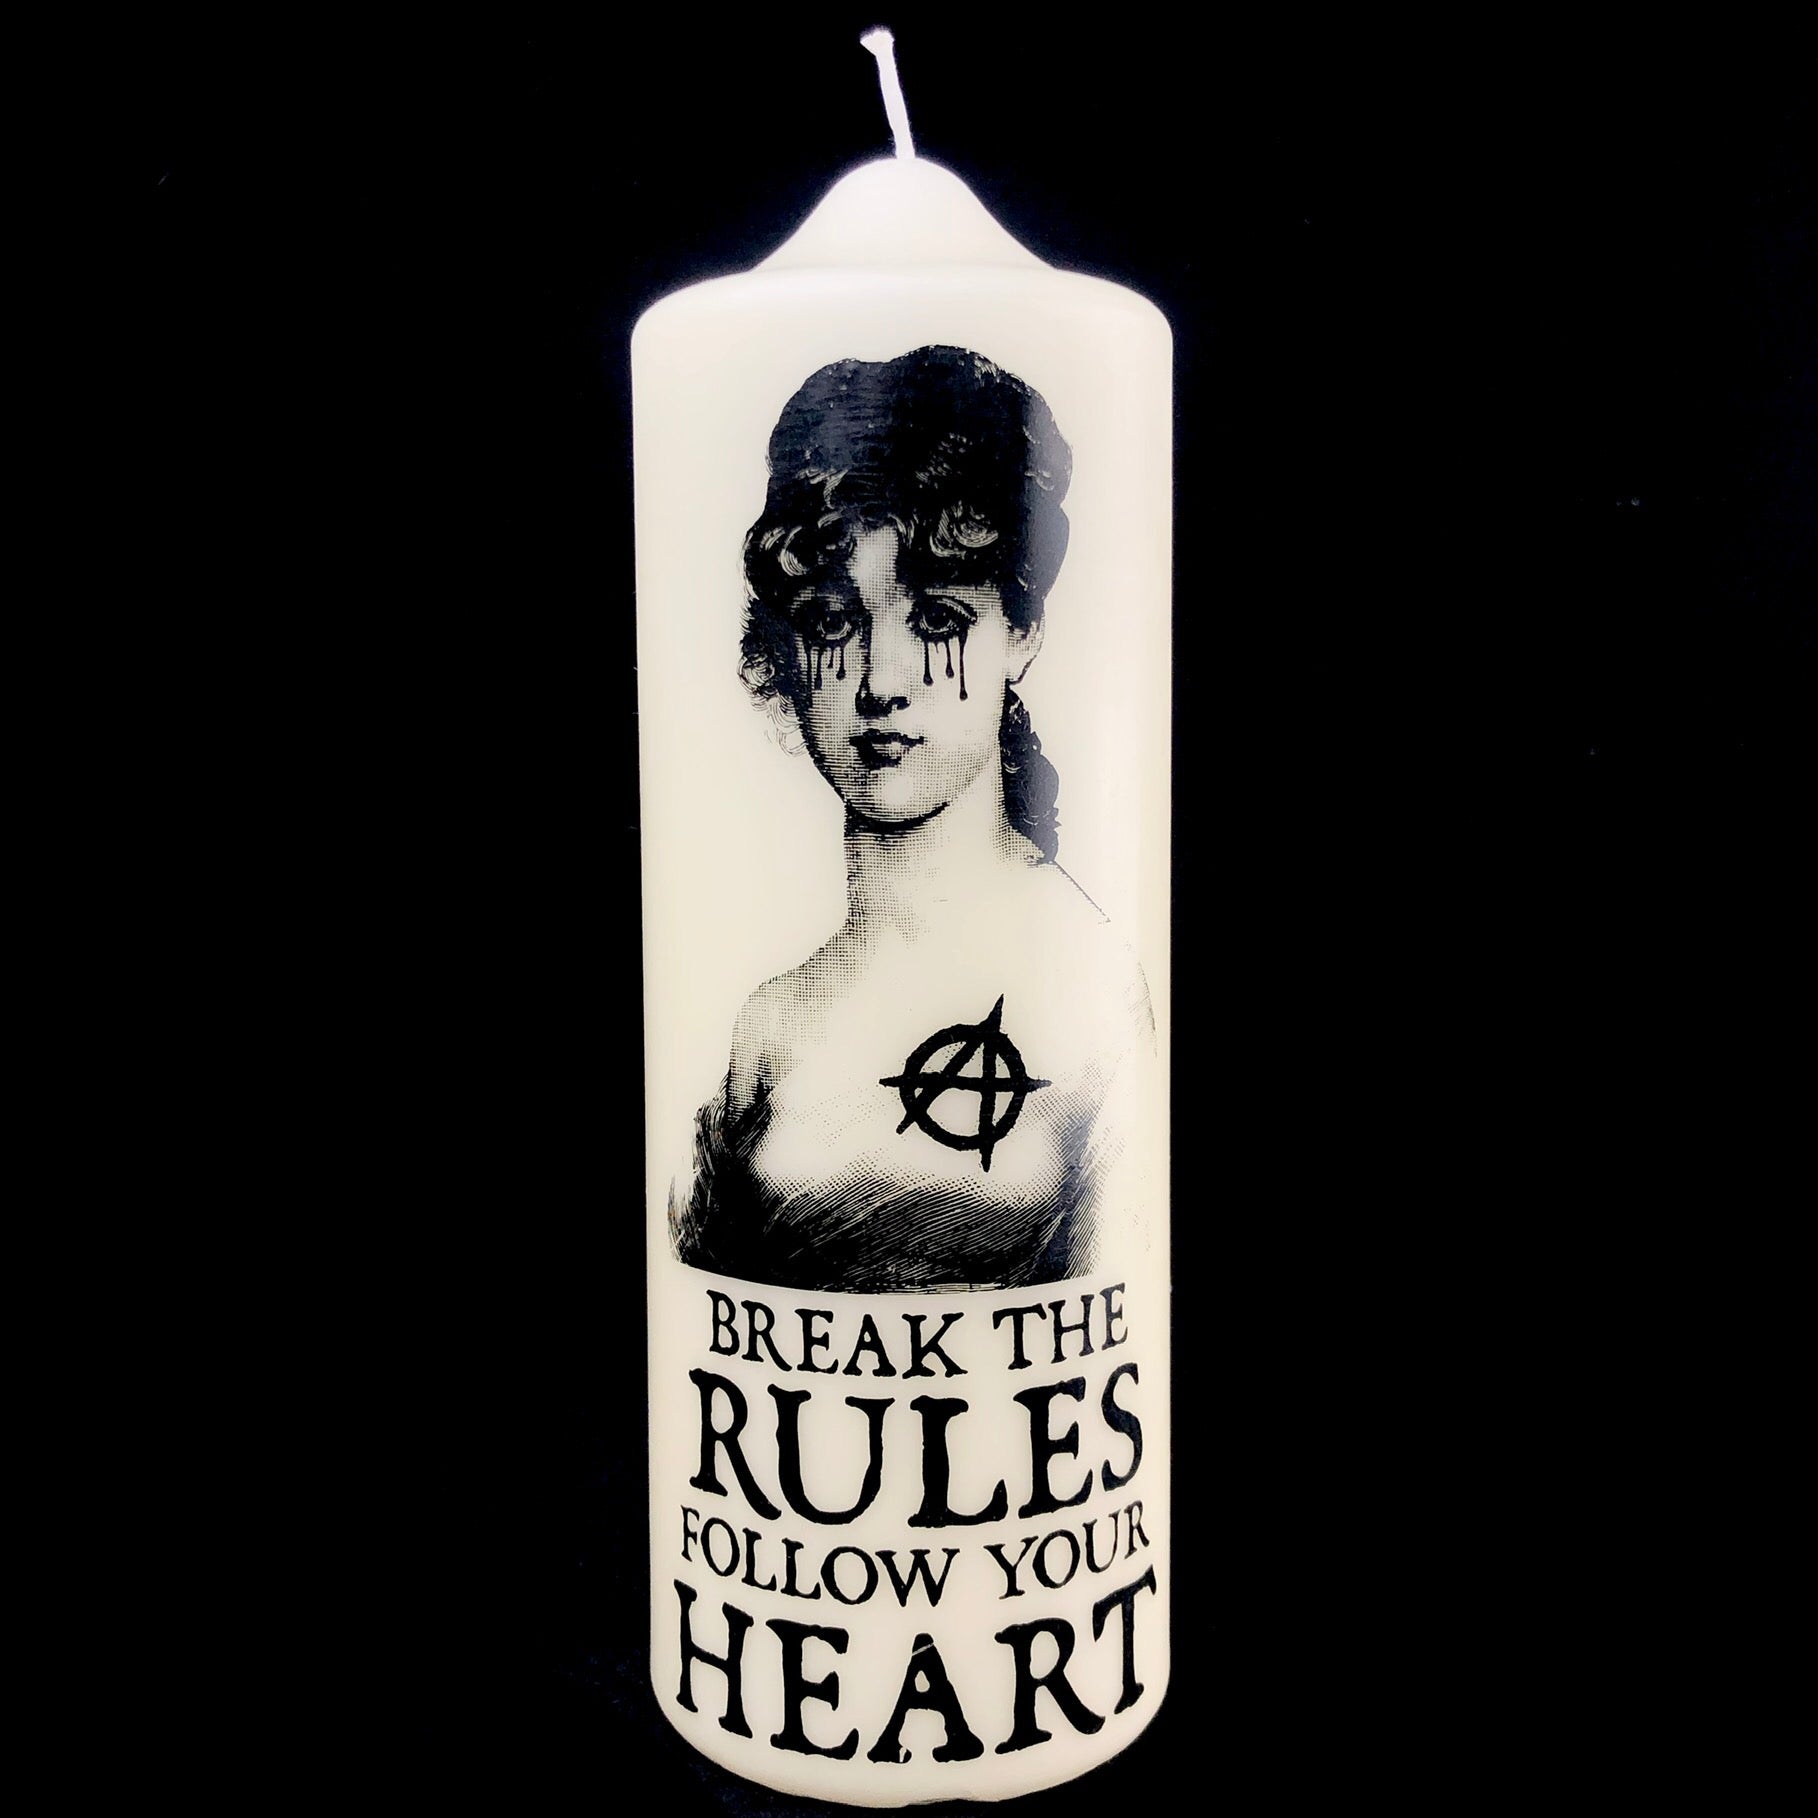 uncented pillar candle made in italy with printed black image and the words "break the rules follow your heart"